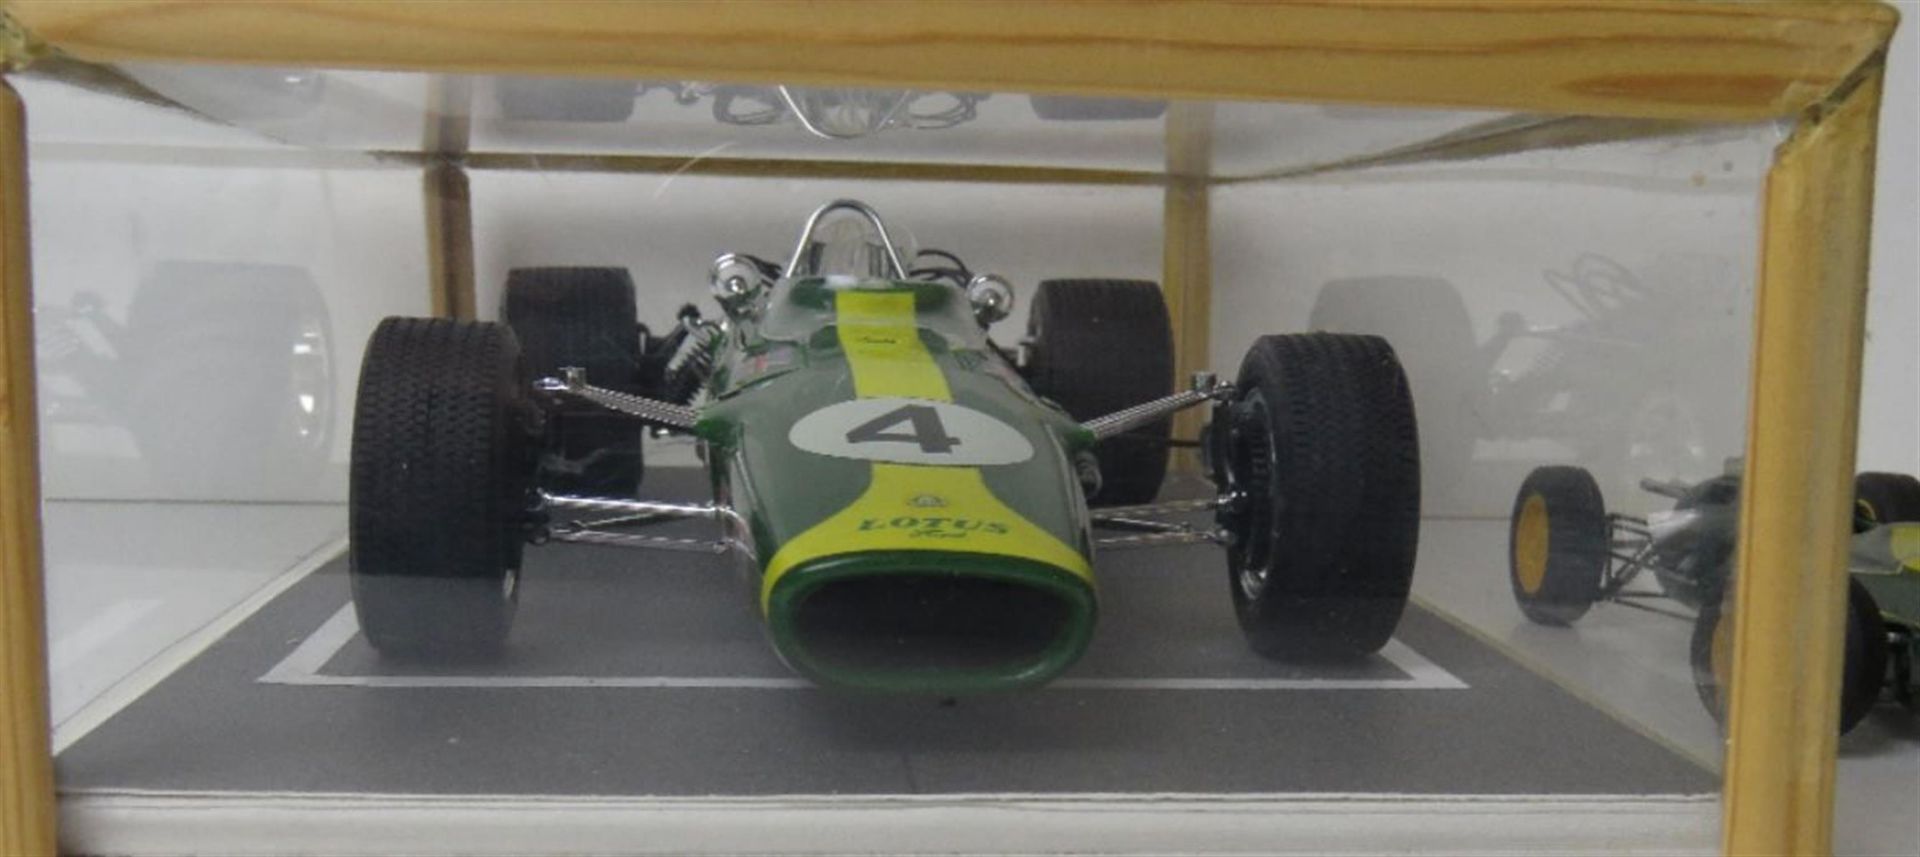 **Regretfully Withdrawn** A Fine Scale Model of Jim Clark's 1968 Lotus Ford Type 49 - Image 4 of 4